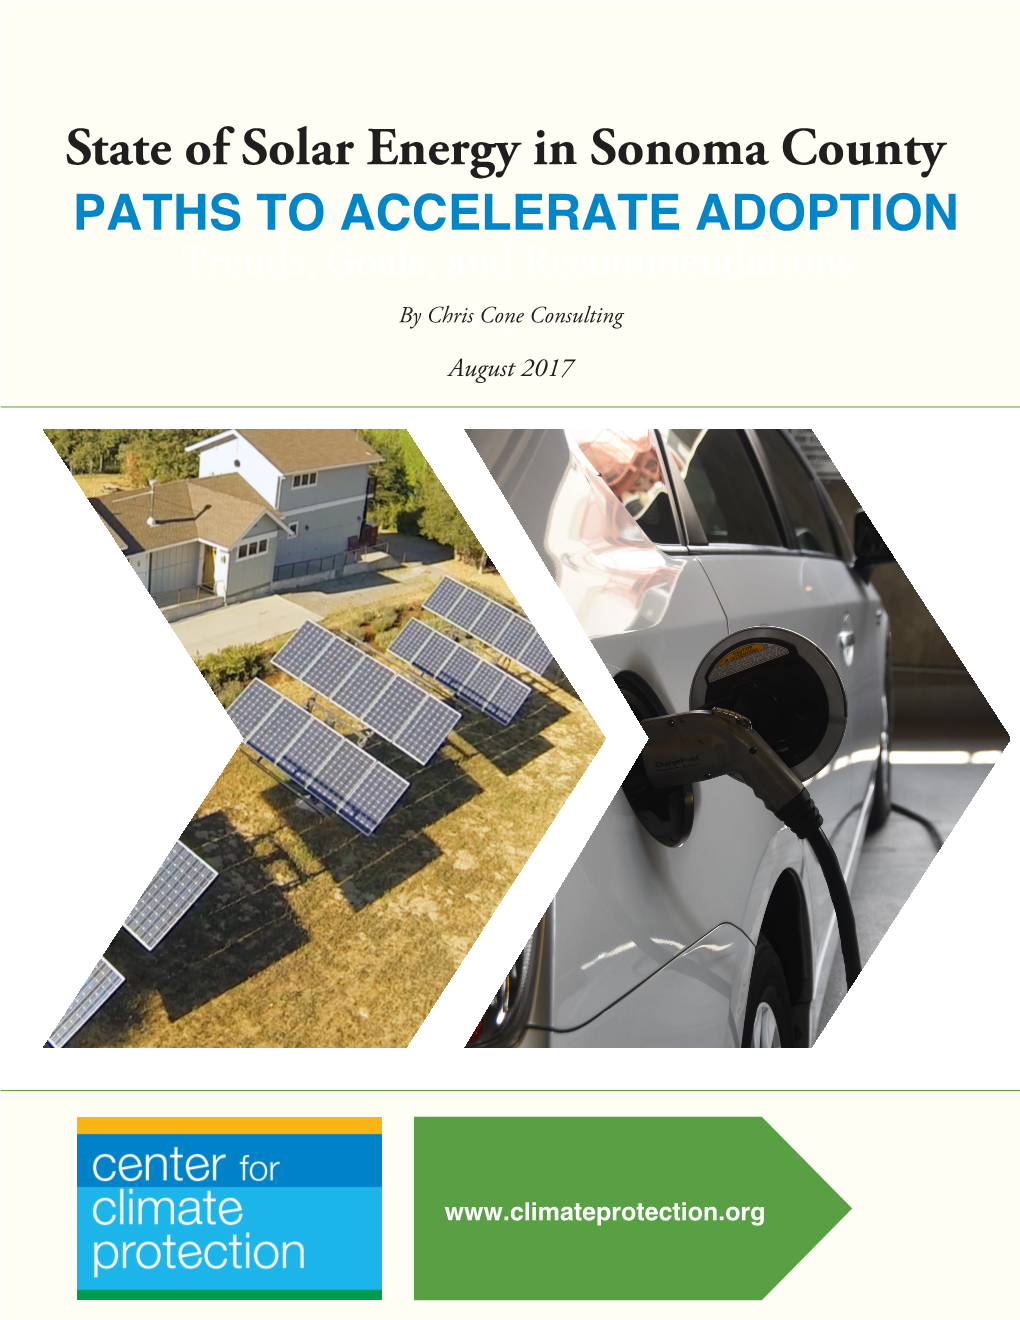 State of Solar Energy in Sonoma County: Paths to Accelerate Adoption